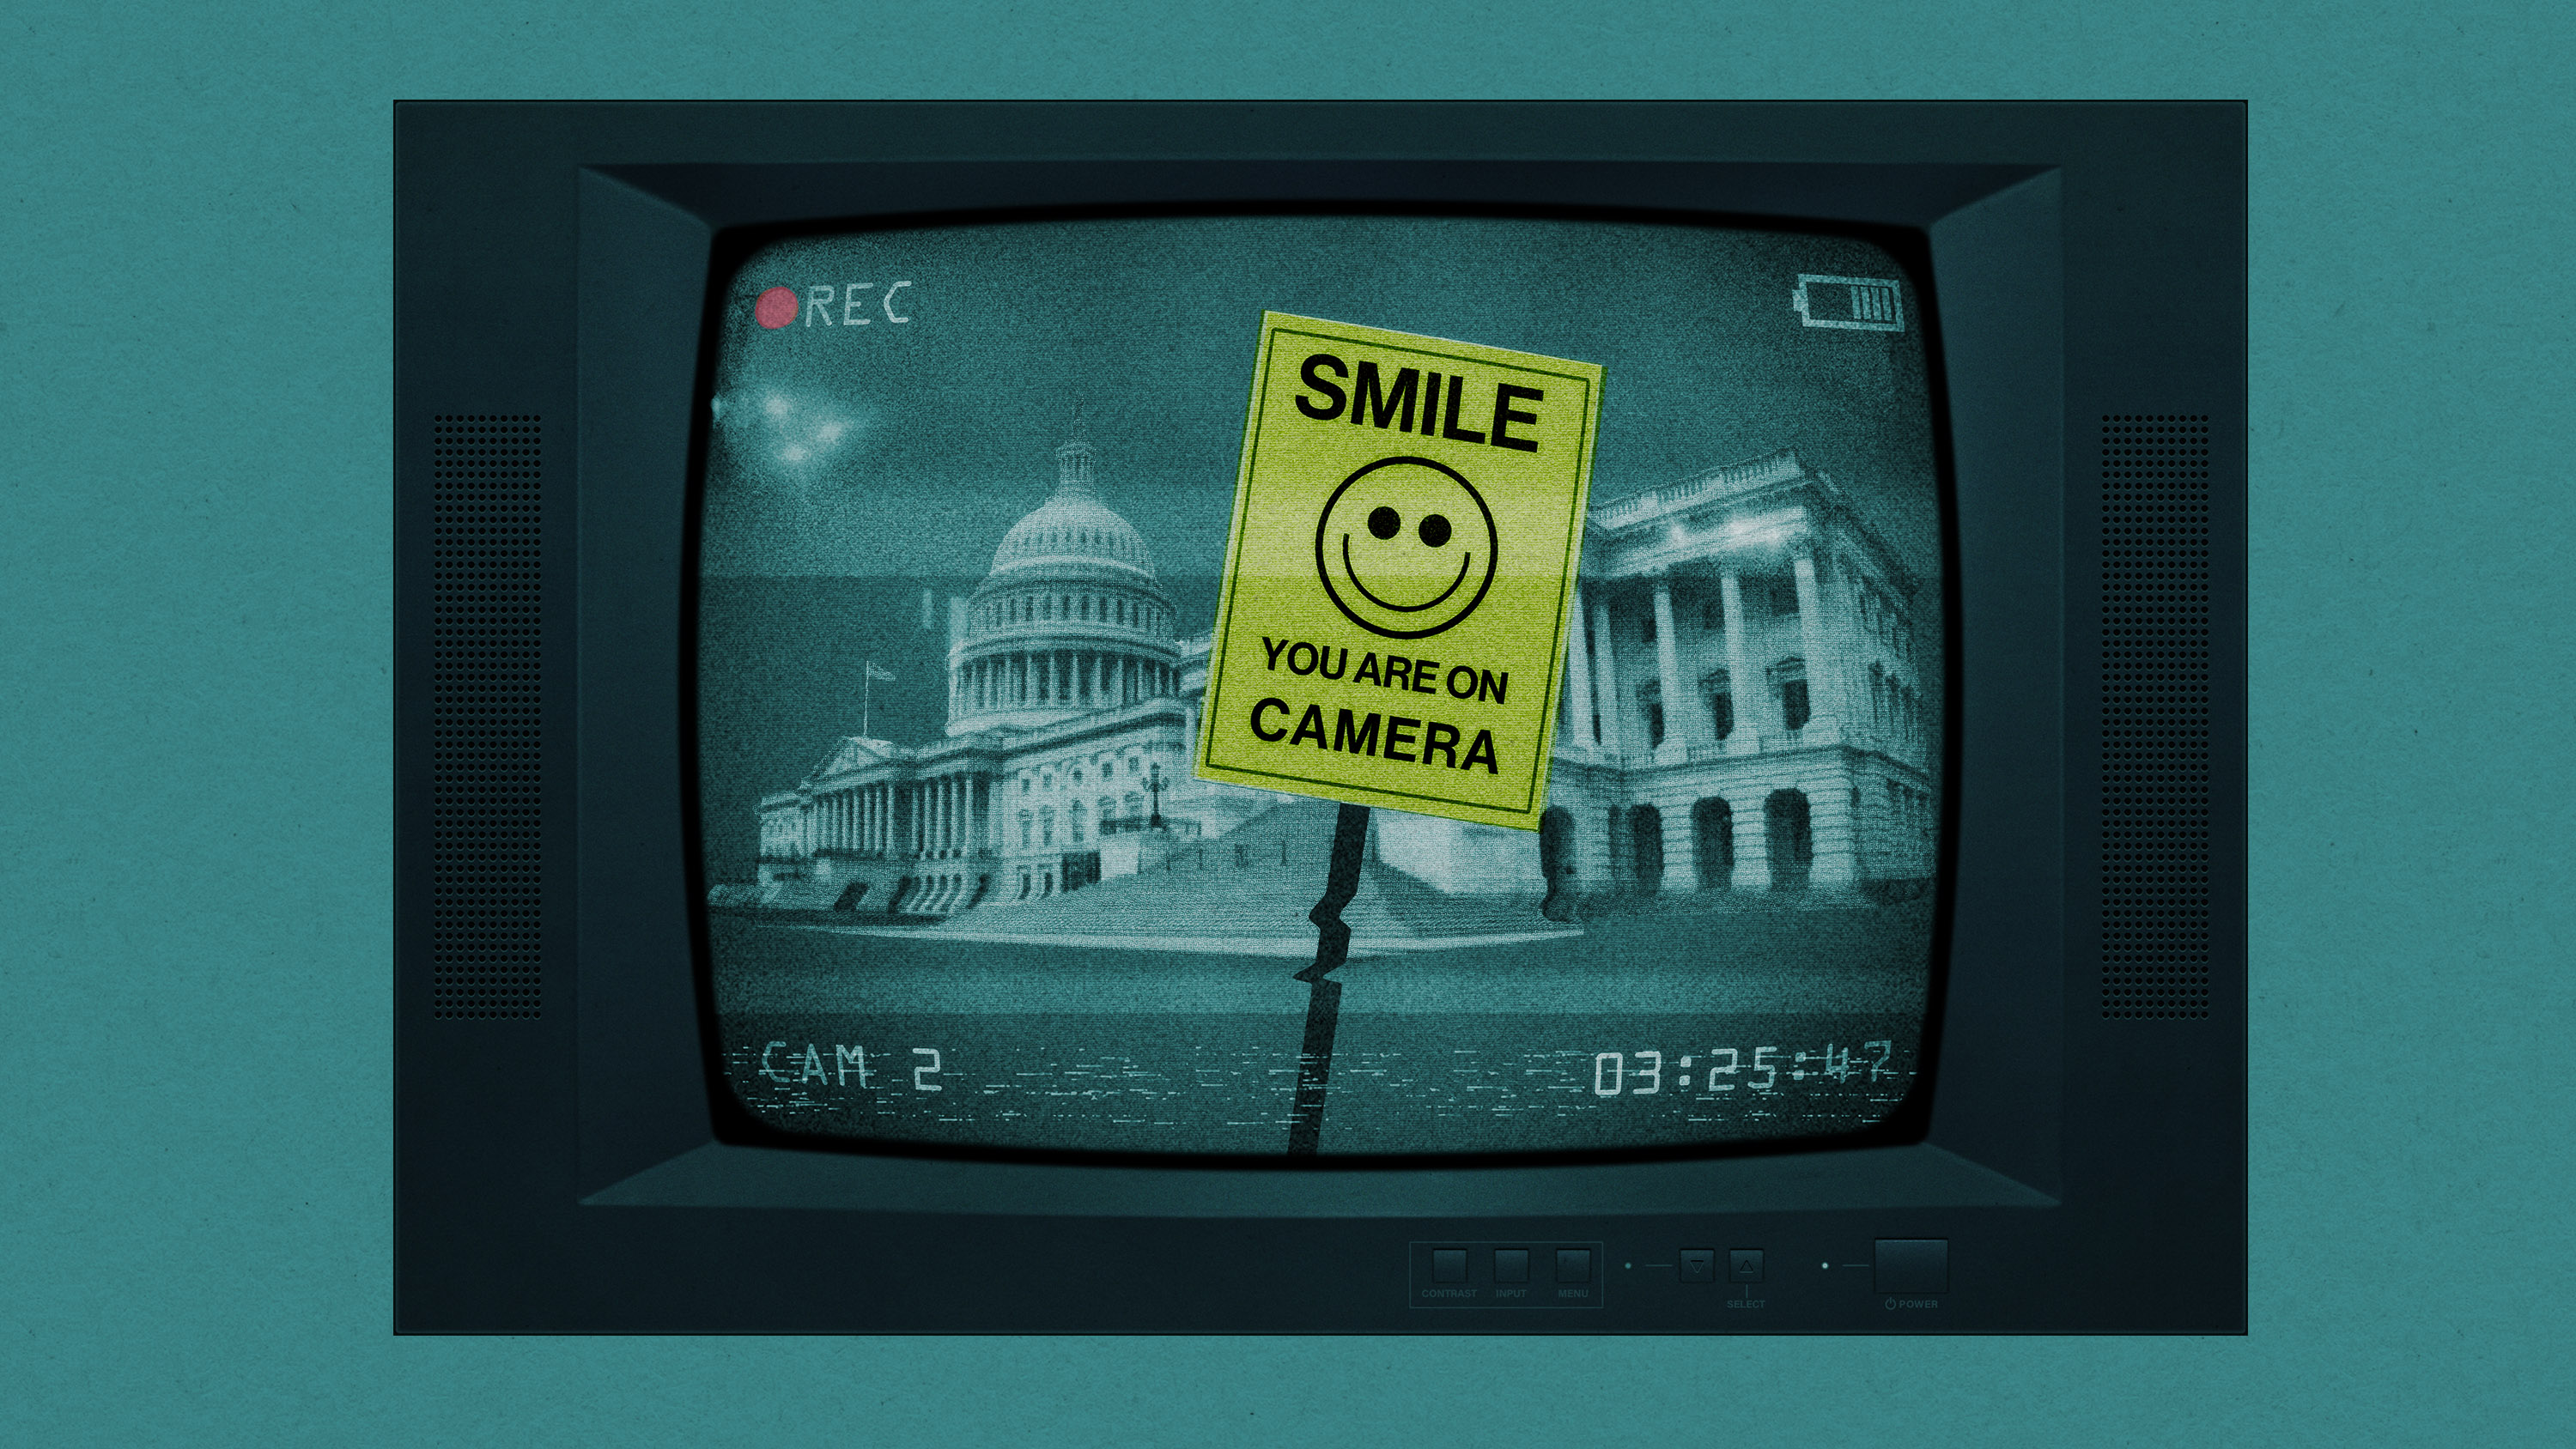 a security monitor showing the US Capitol building with a &quot;Smile. You are on camera&quot; sign in front of it